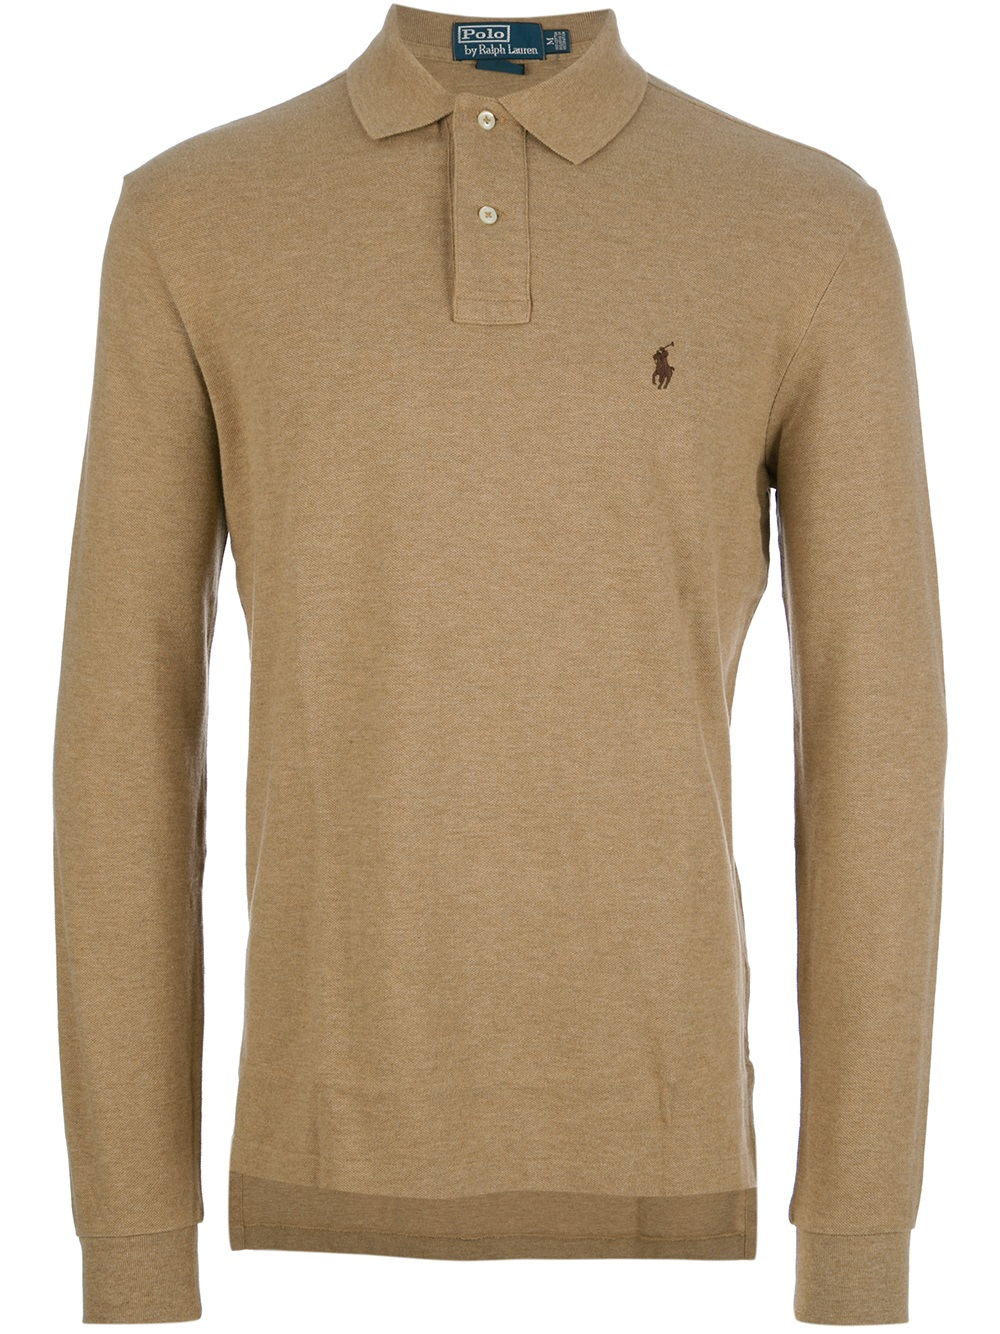 Polo Ralph Lauren Long Sleeve Polo Shirt in Brown for Men - Lyst